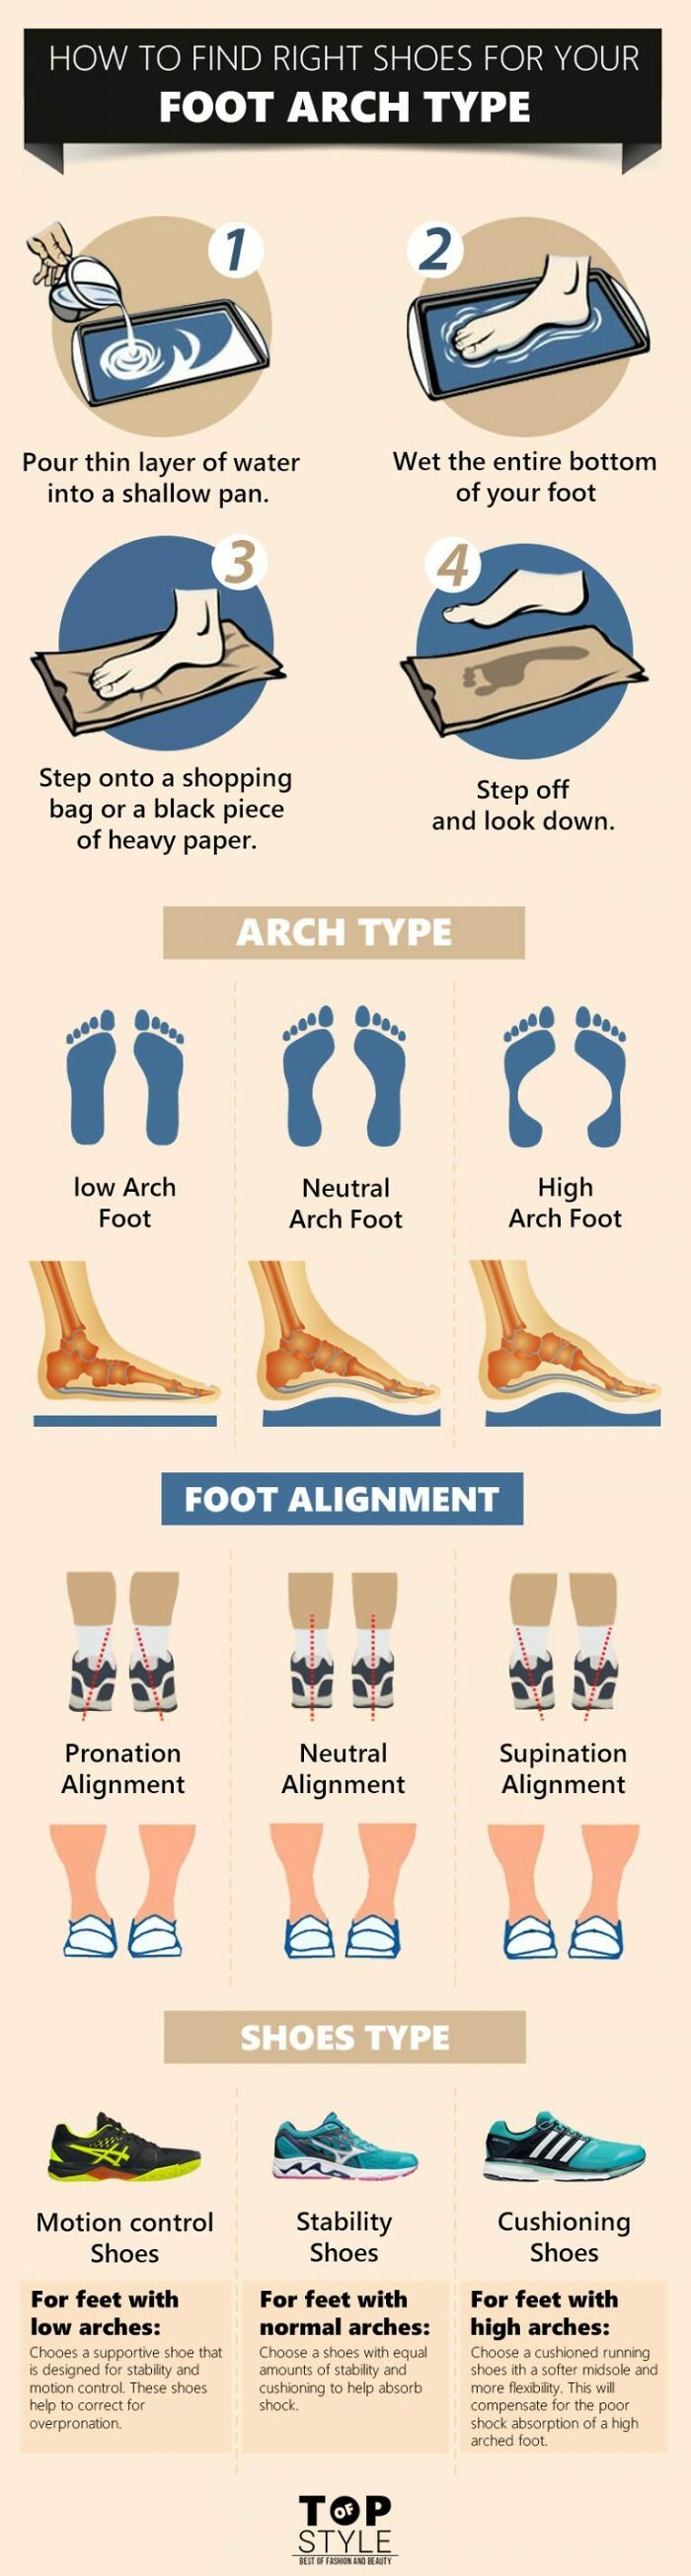 Find The Best Shoe For Your Feet With This Simple Guide